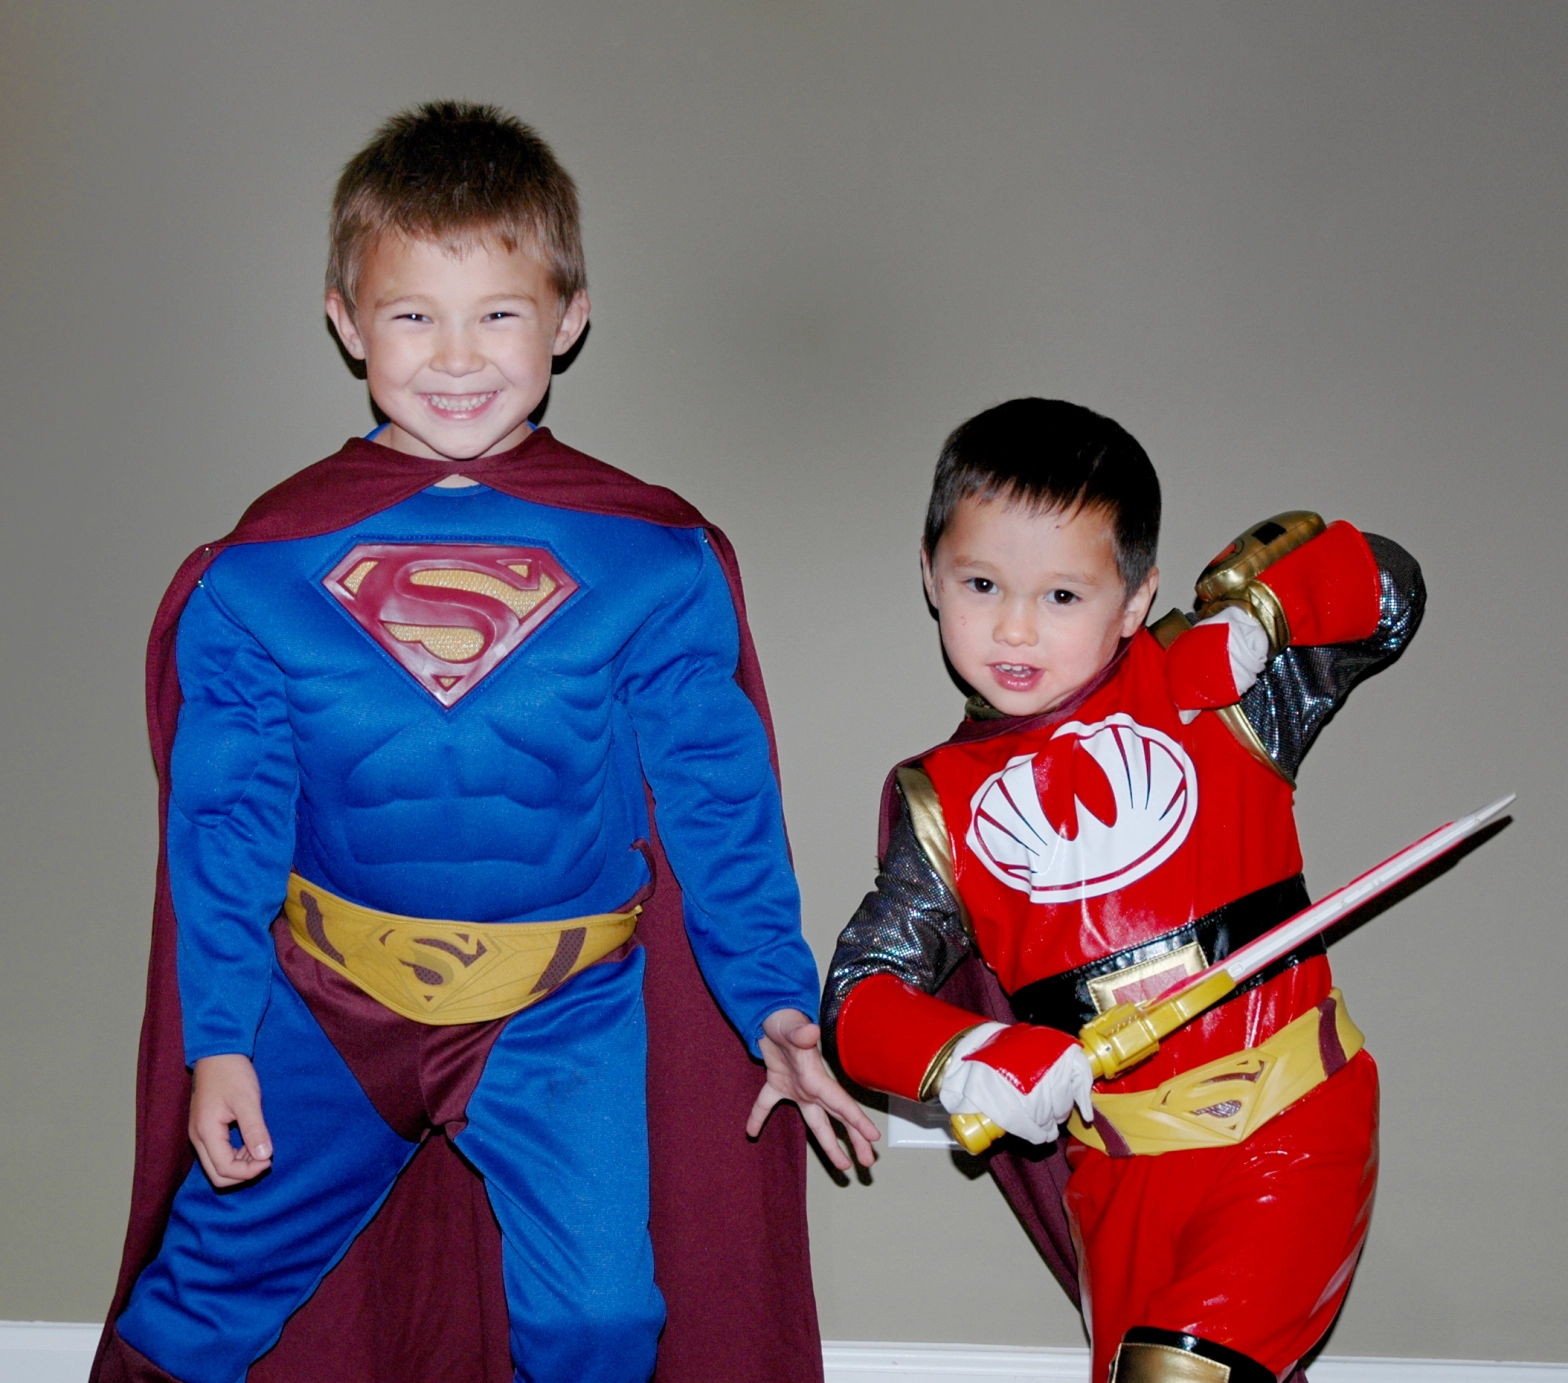 My sons Kendrick and Keaton dressing up as fictional superheroes for Halloween in 2008.